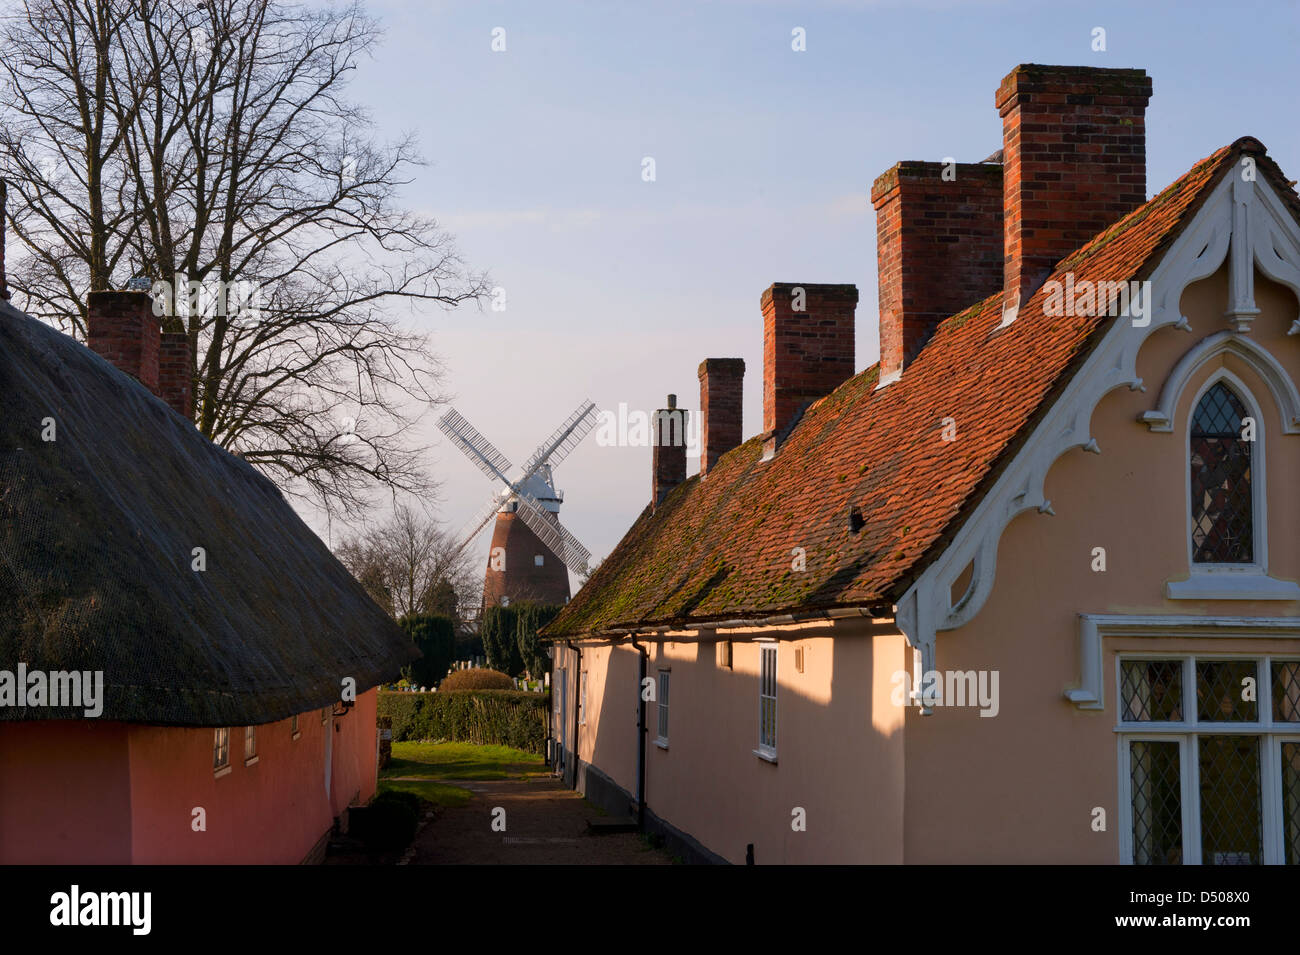 Thaxted, Essex, England. 21 March 2013 Seen here: The Almshouses and John Webb's Windmill. Stock Photo